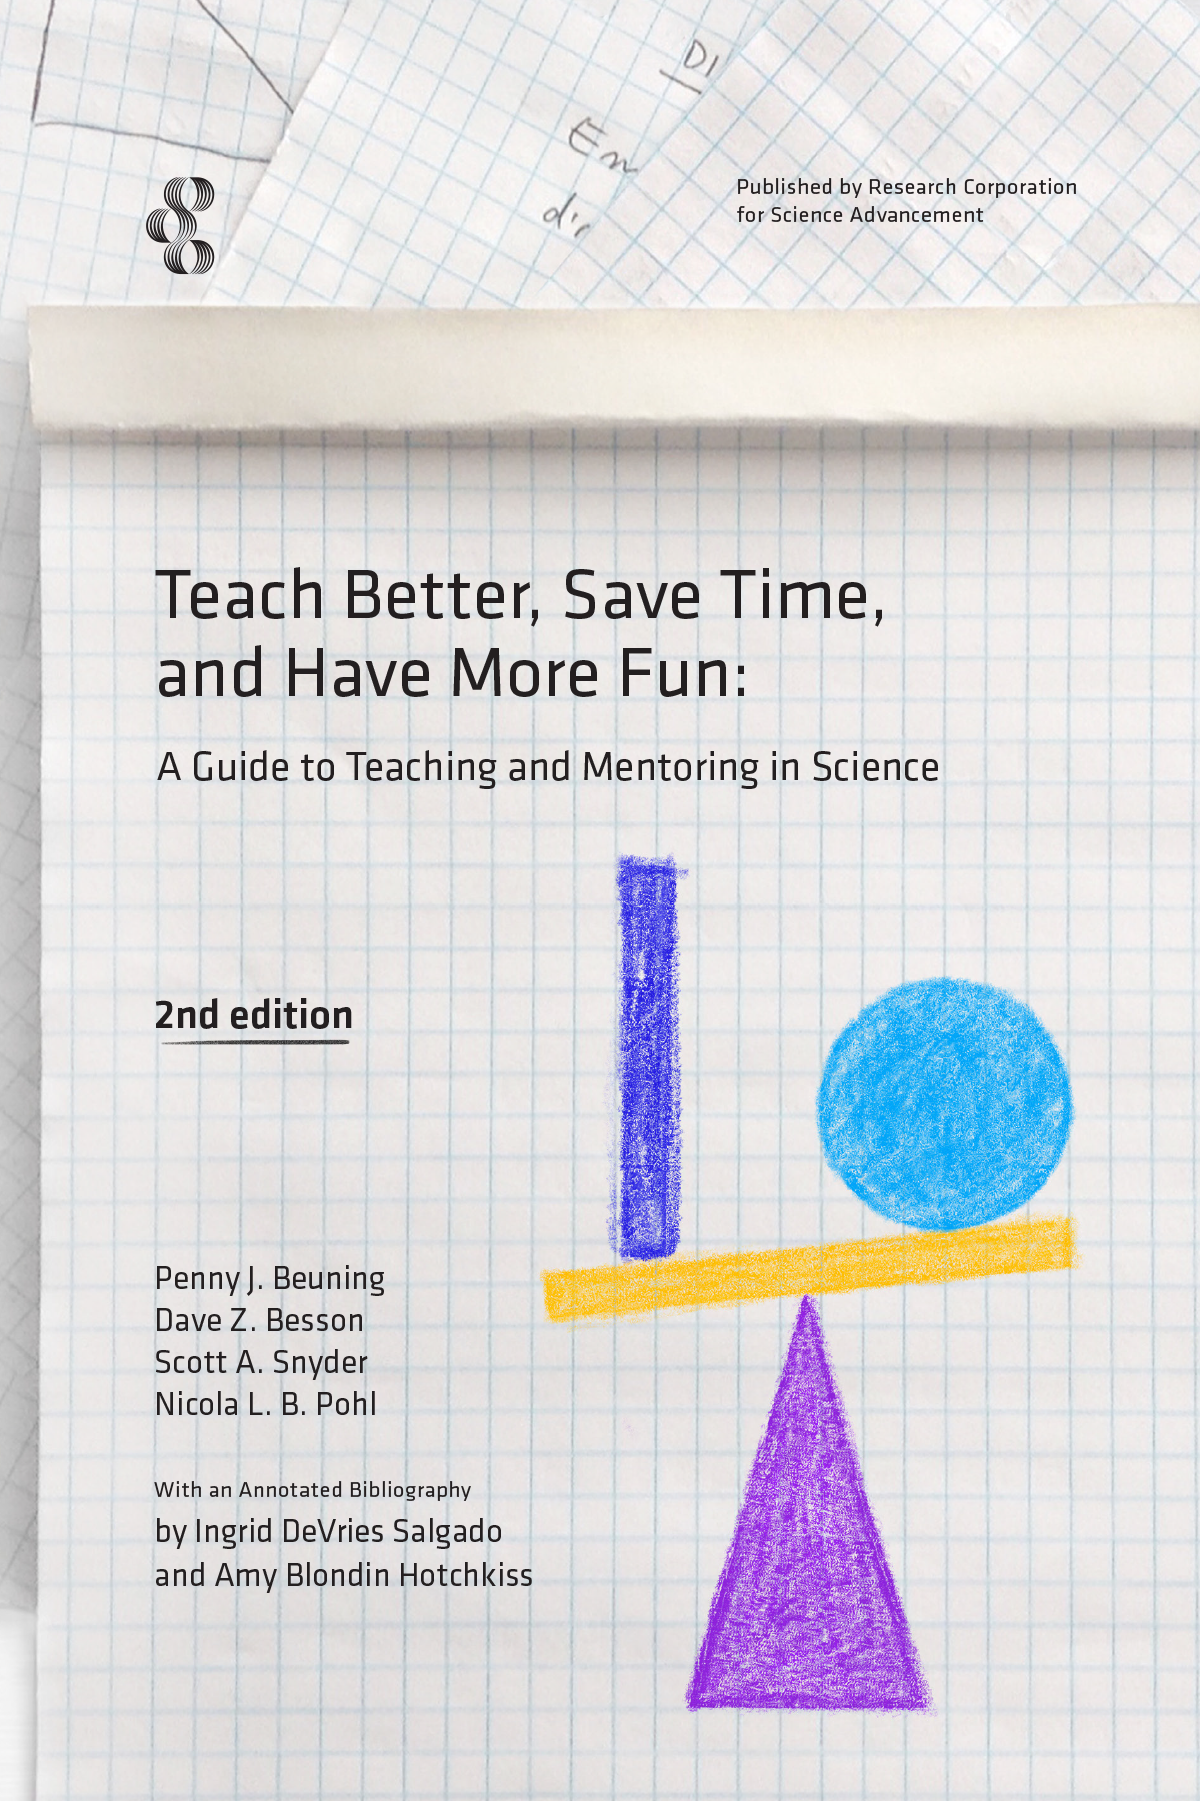 Teach Better, Save Time, and Have More Fun: A Guide to Teaching and Mentoring in Science -- 2nd Edition